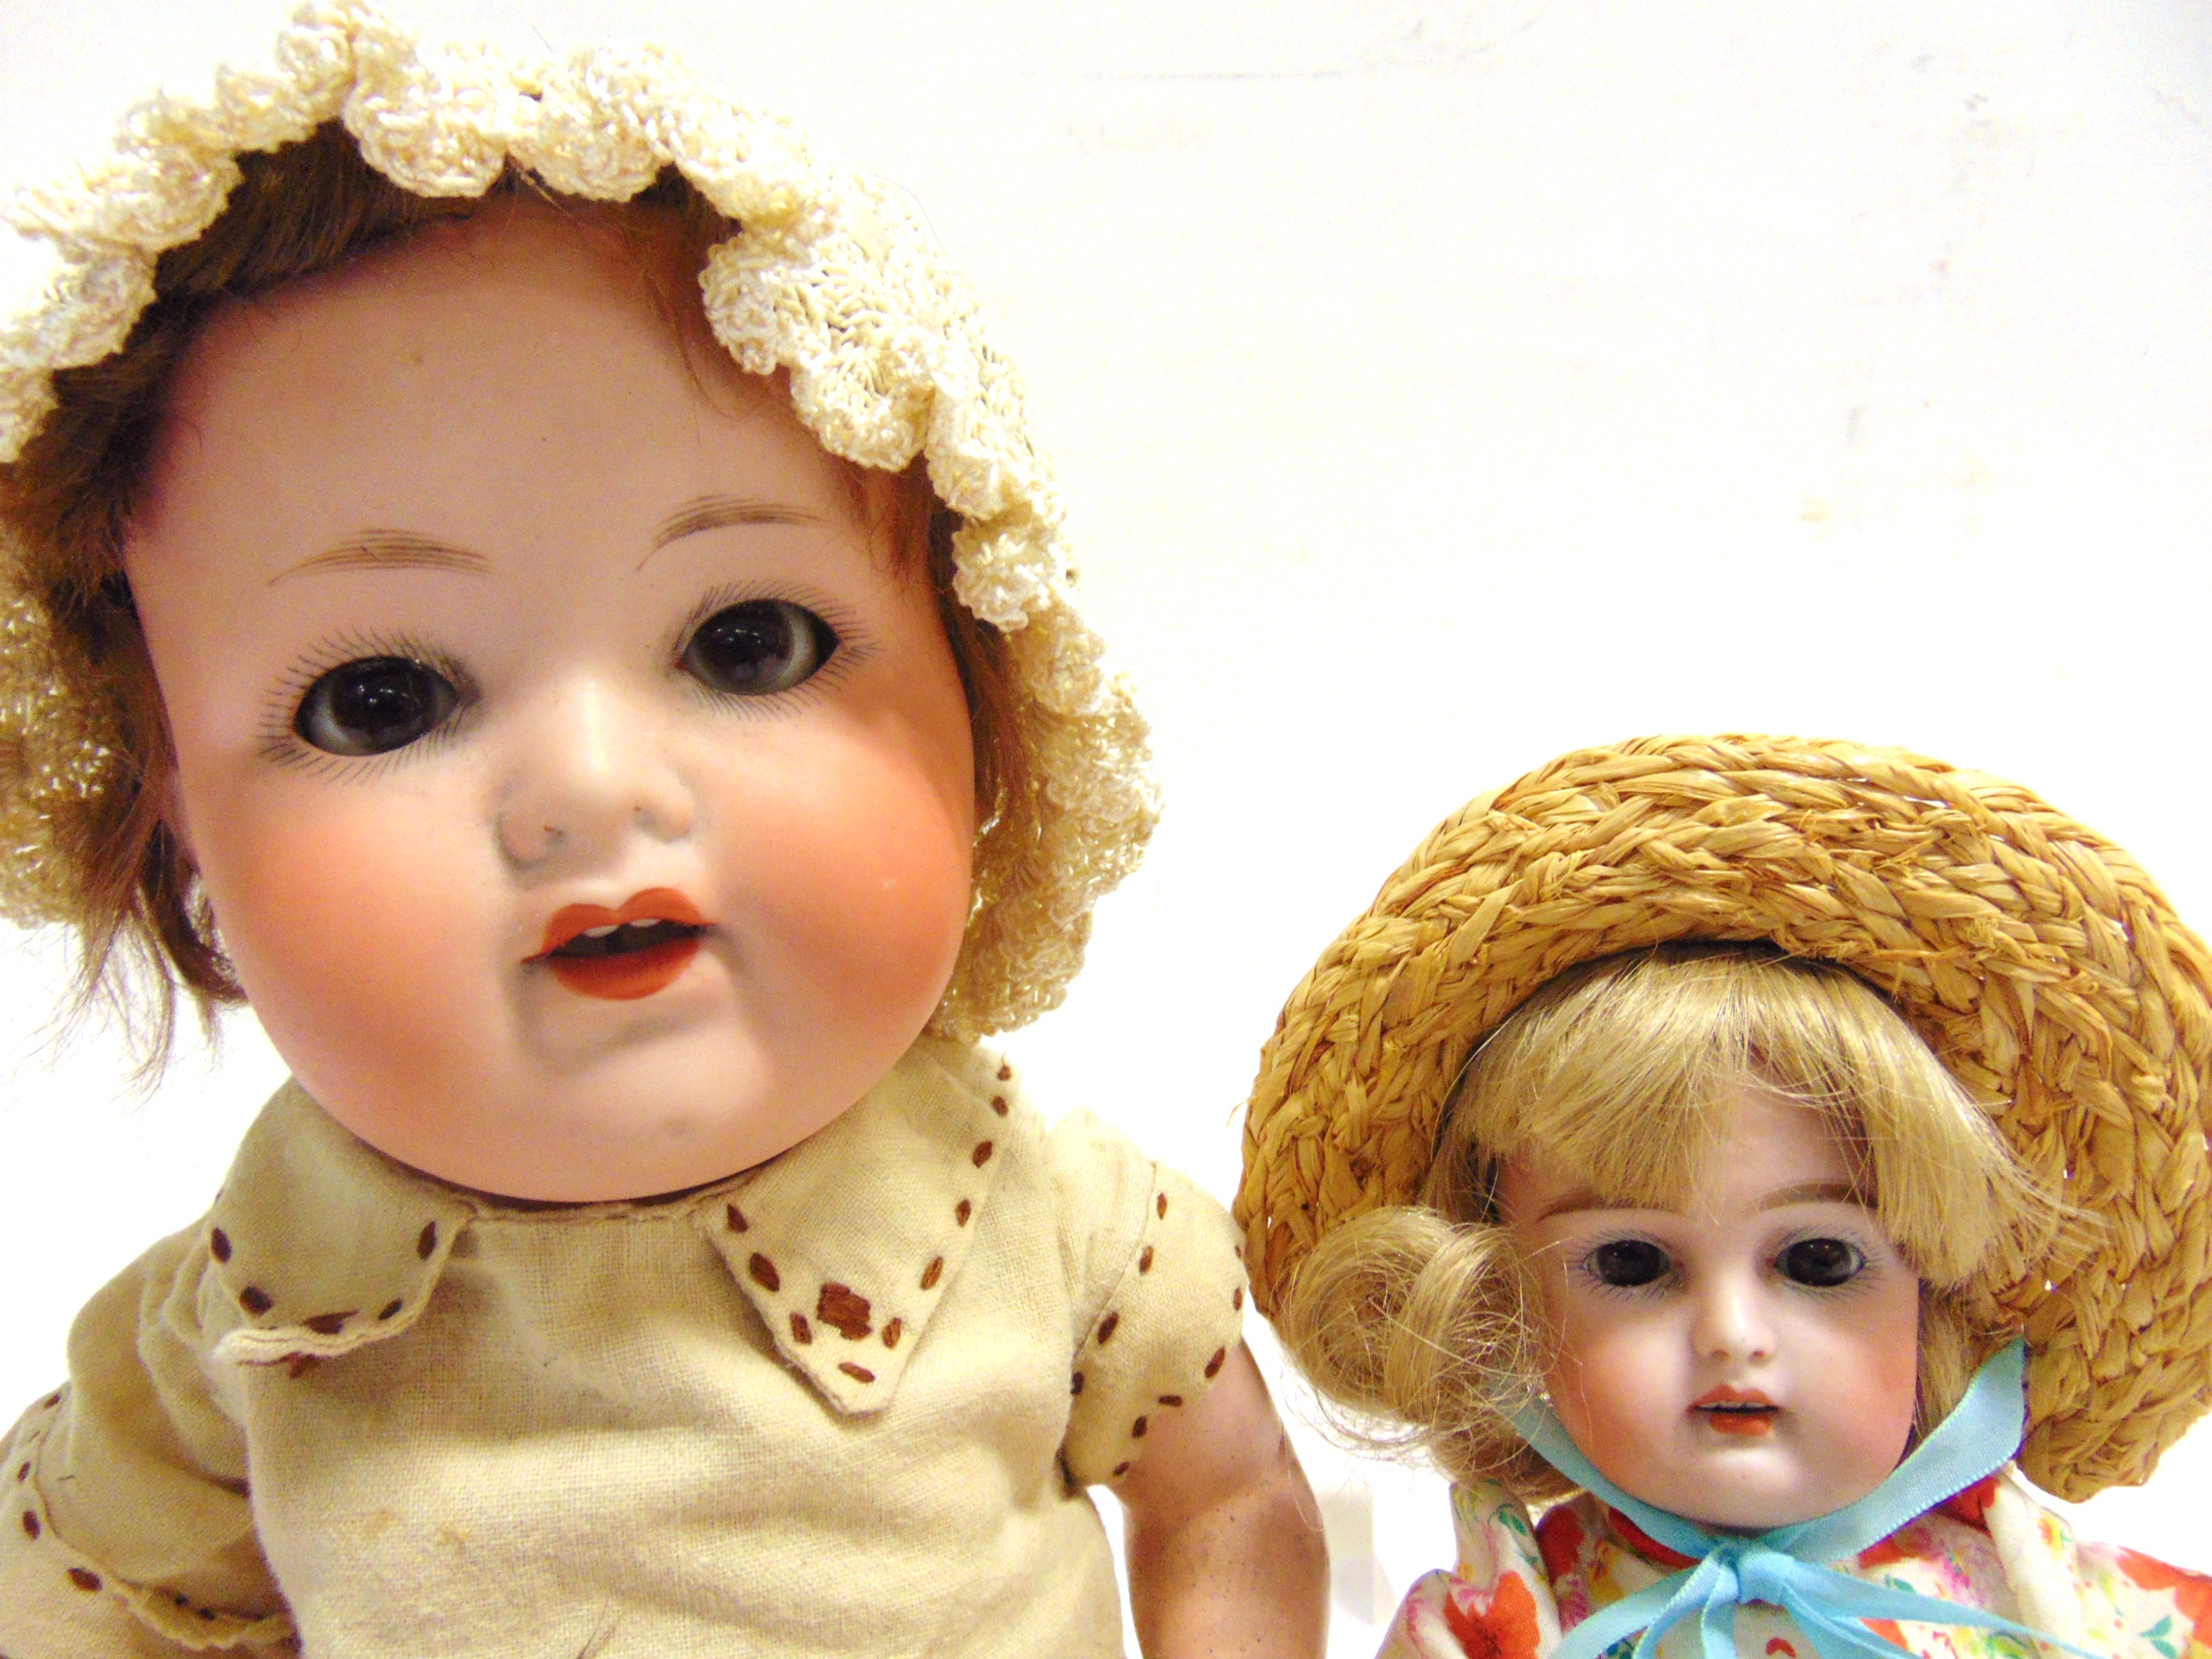 TWO BISQUE DOLLS comprising an Armand Marseille bisque socket head doll, with a cropped brown wig, - Image 2 of 2